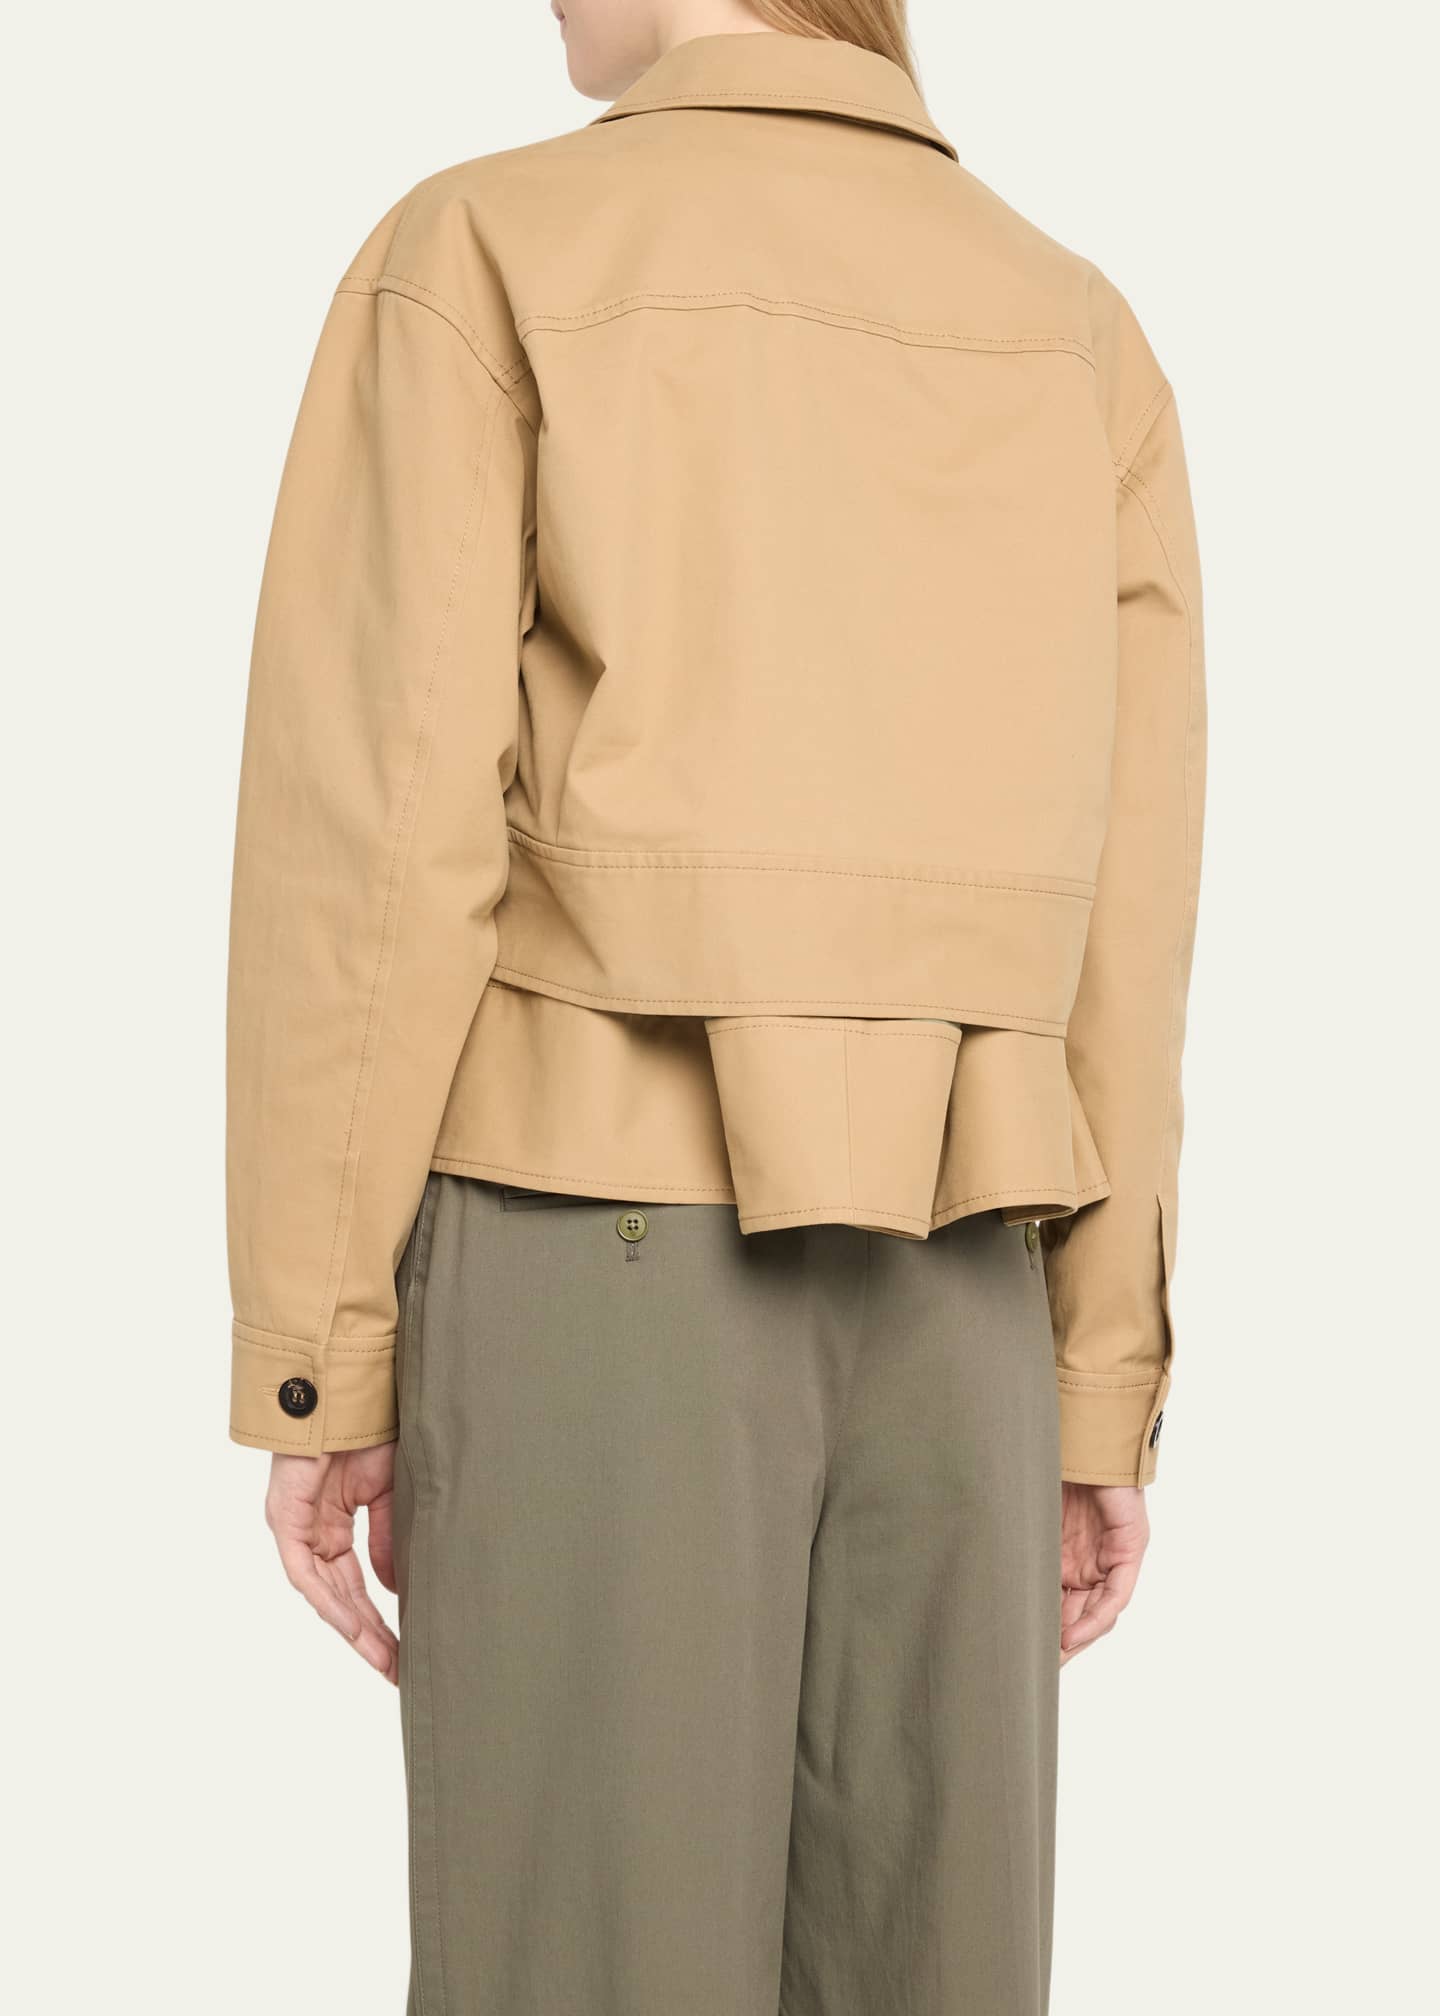 3.1 Phillip Lim Double-Layered Belted Utility Jacket - Bergdorf Goodman